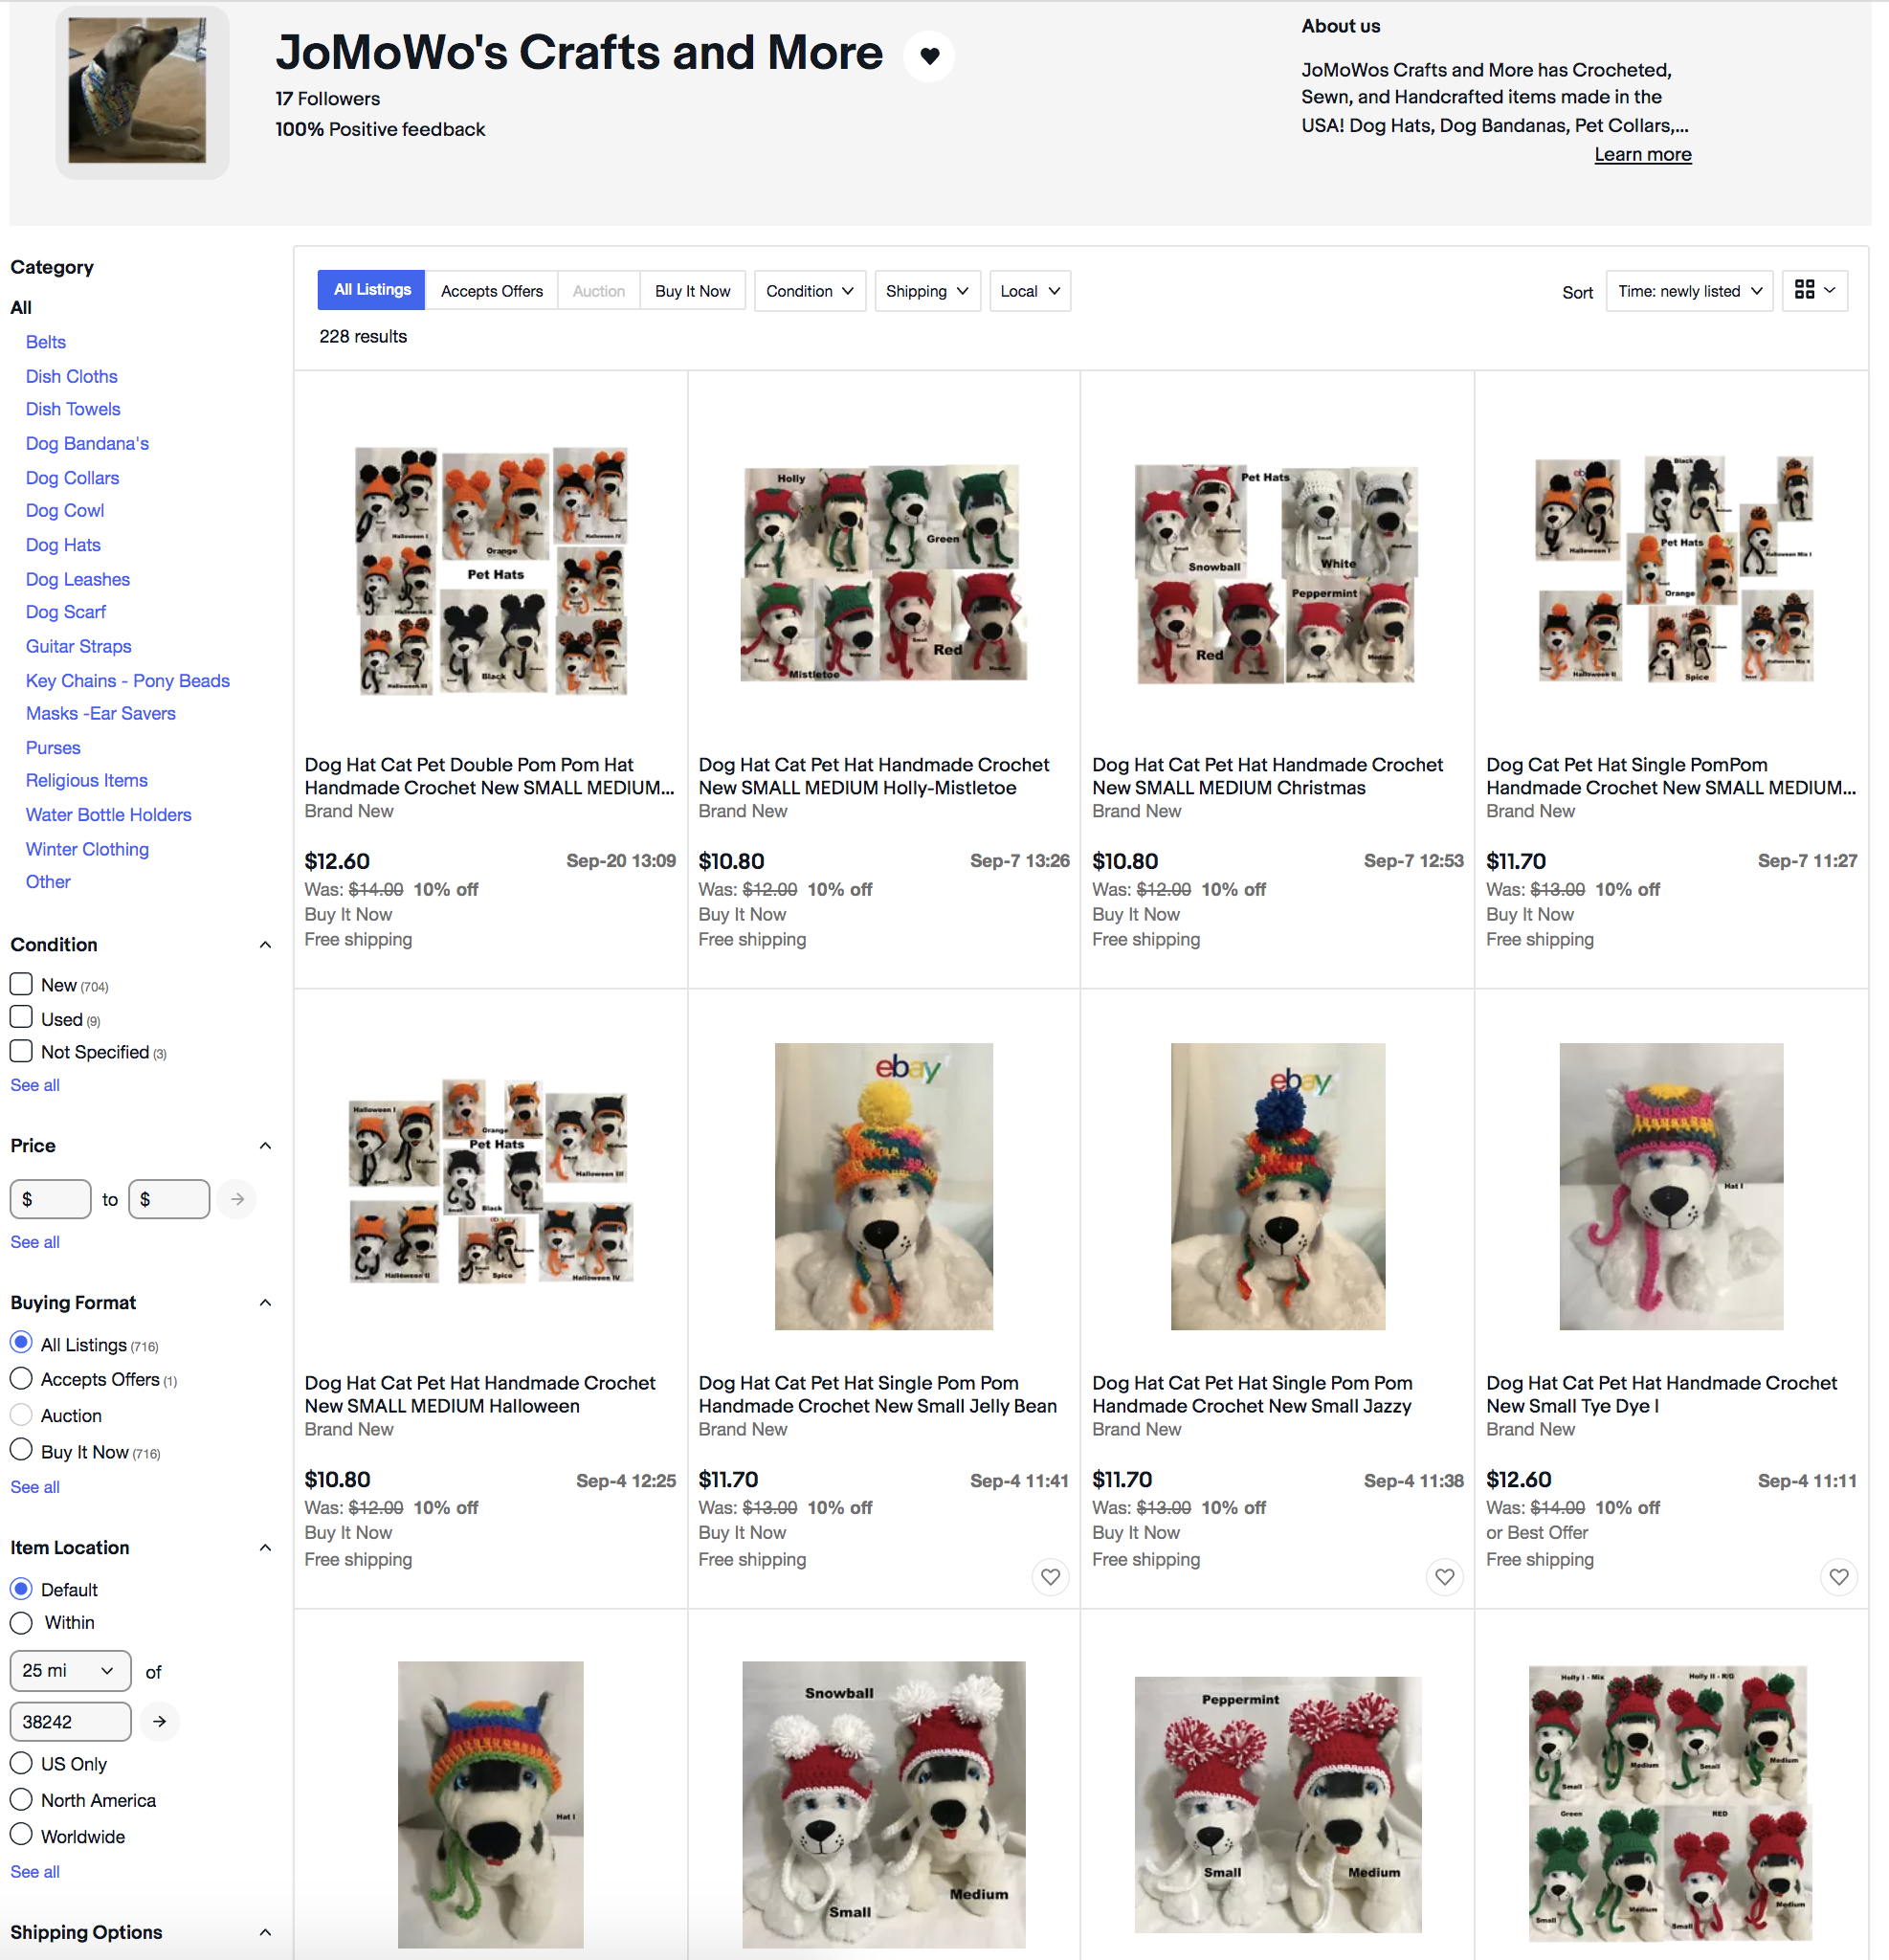 JoMoWos Crafts and More Ebay Store Newly Listed November 26th 2021